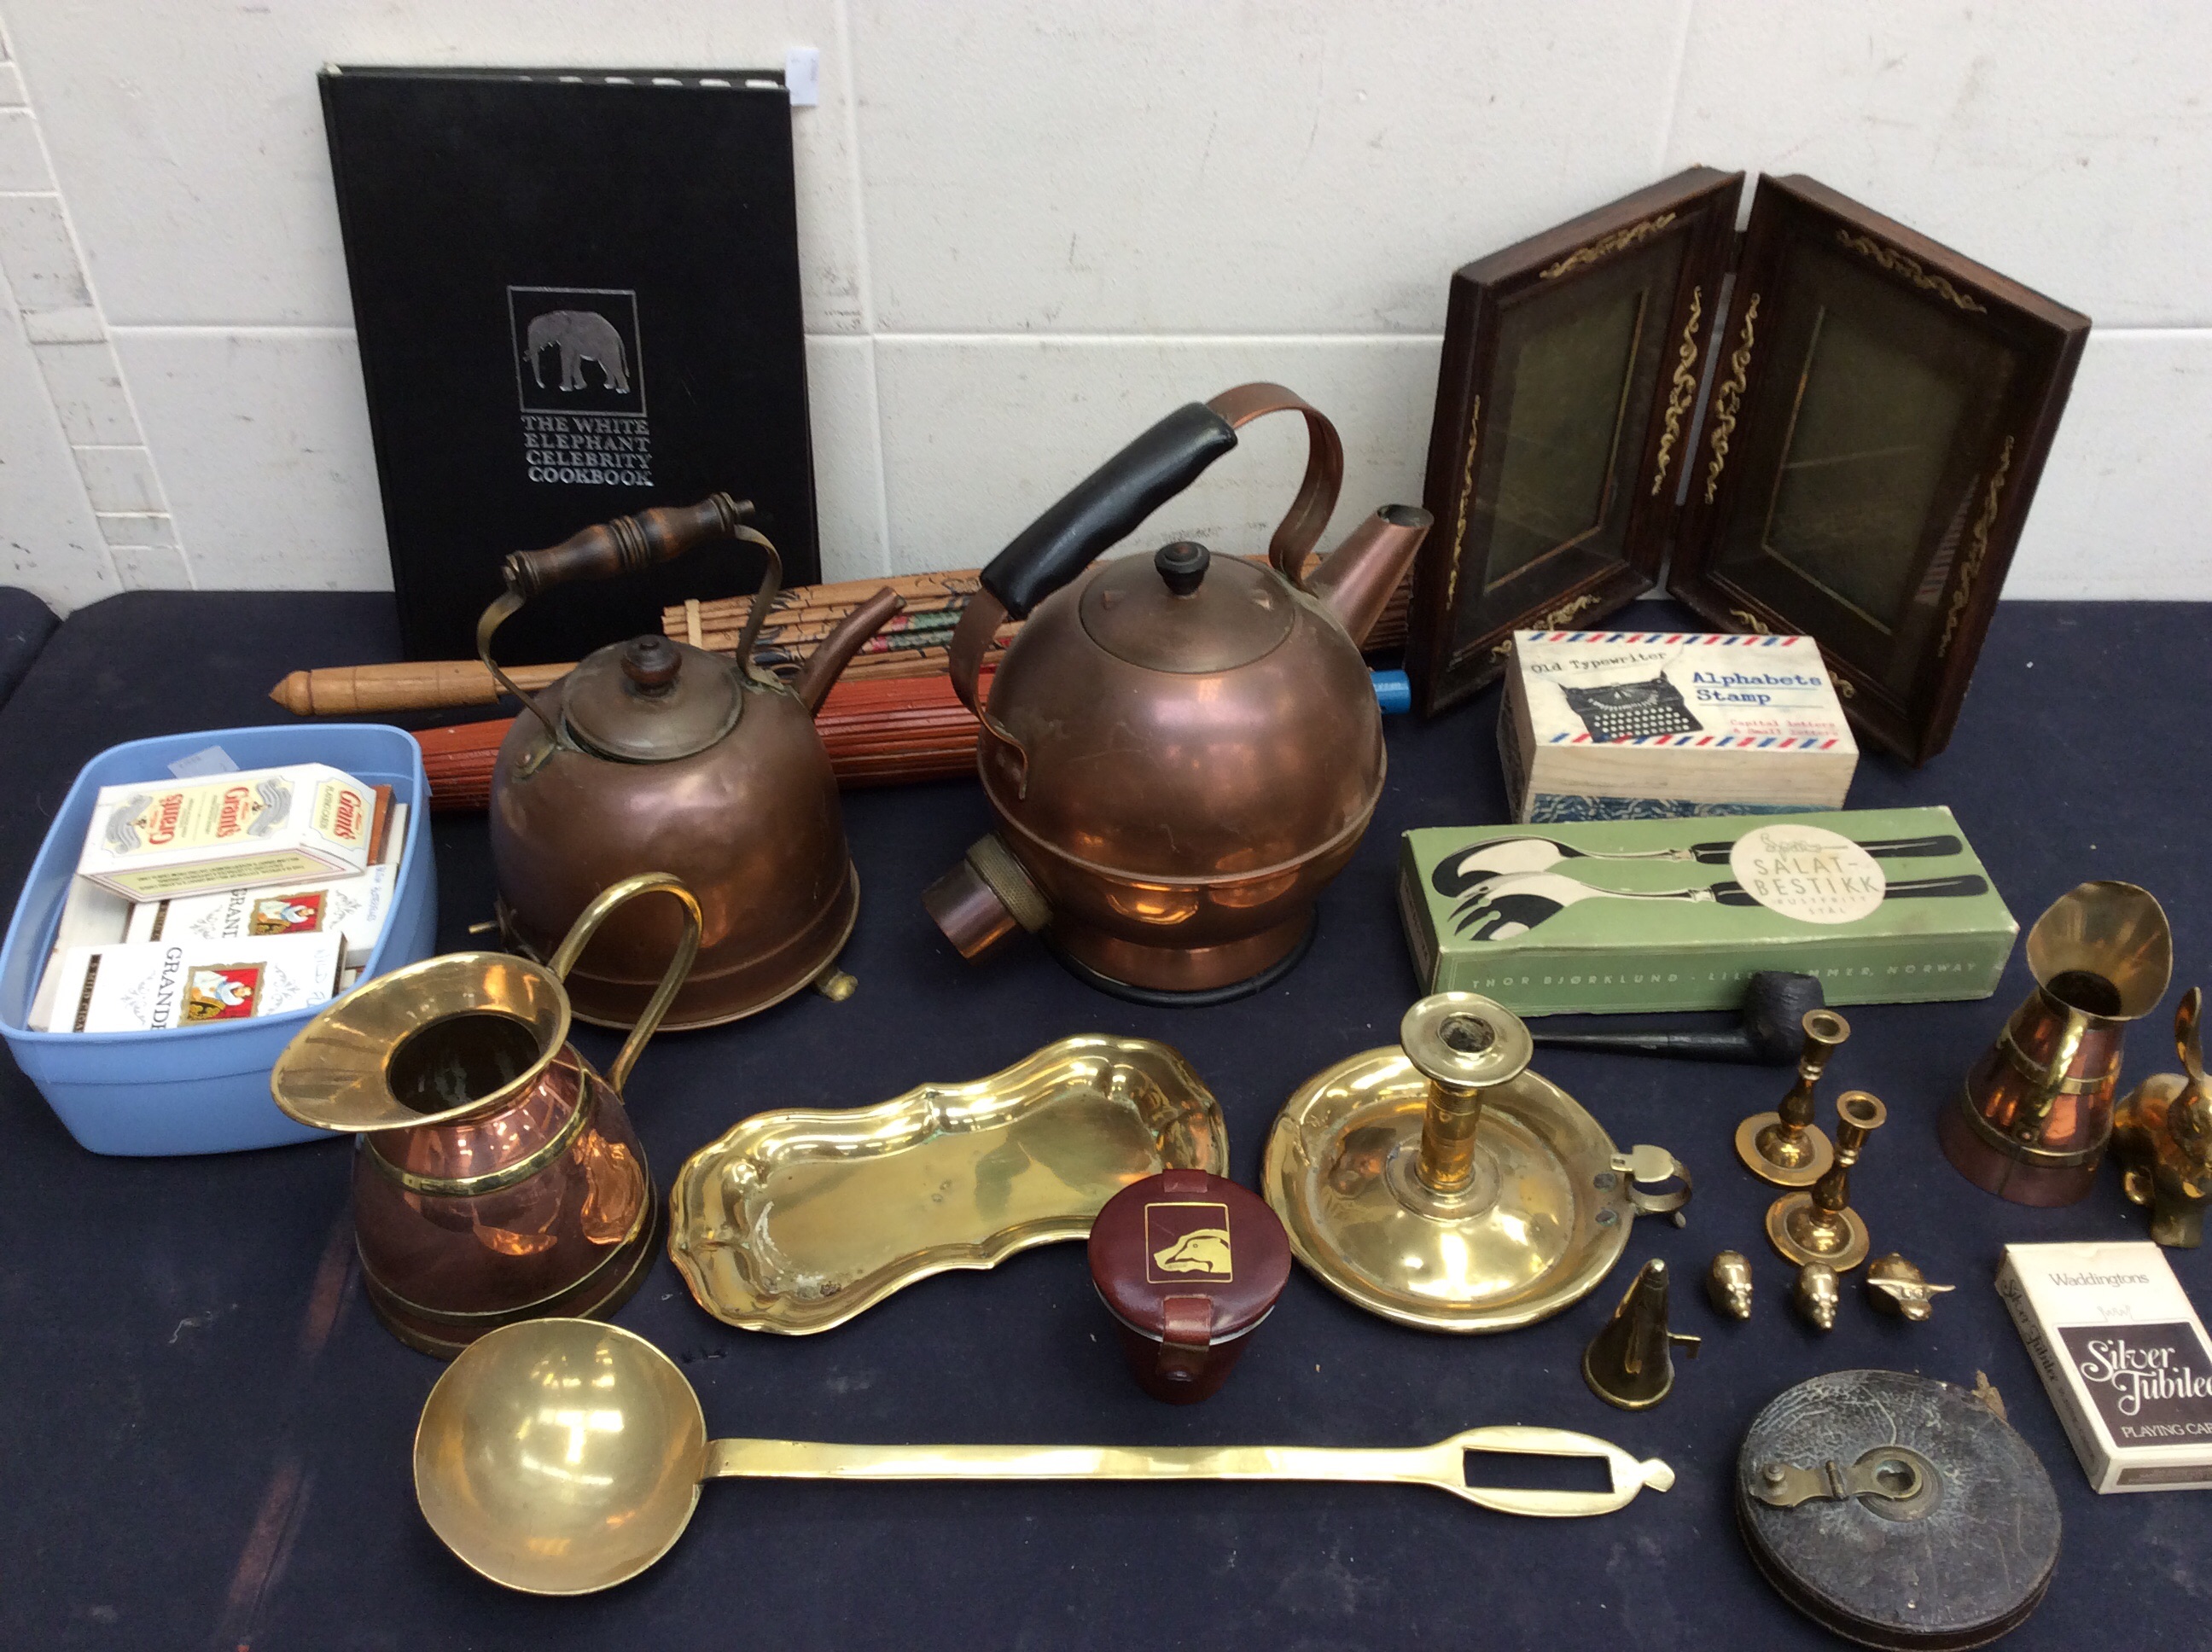 A mixed lot of metalware and other items to include; two copper kettles, ladle, candle holder, - Image 3 of 3